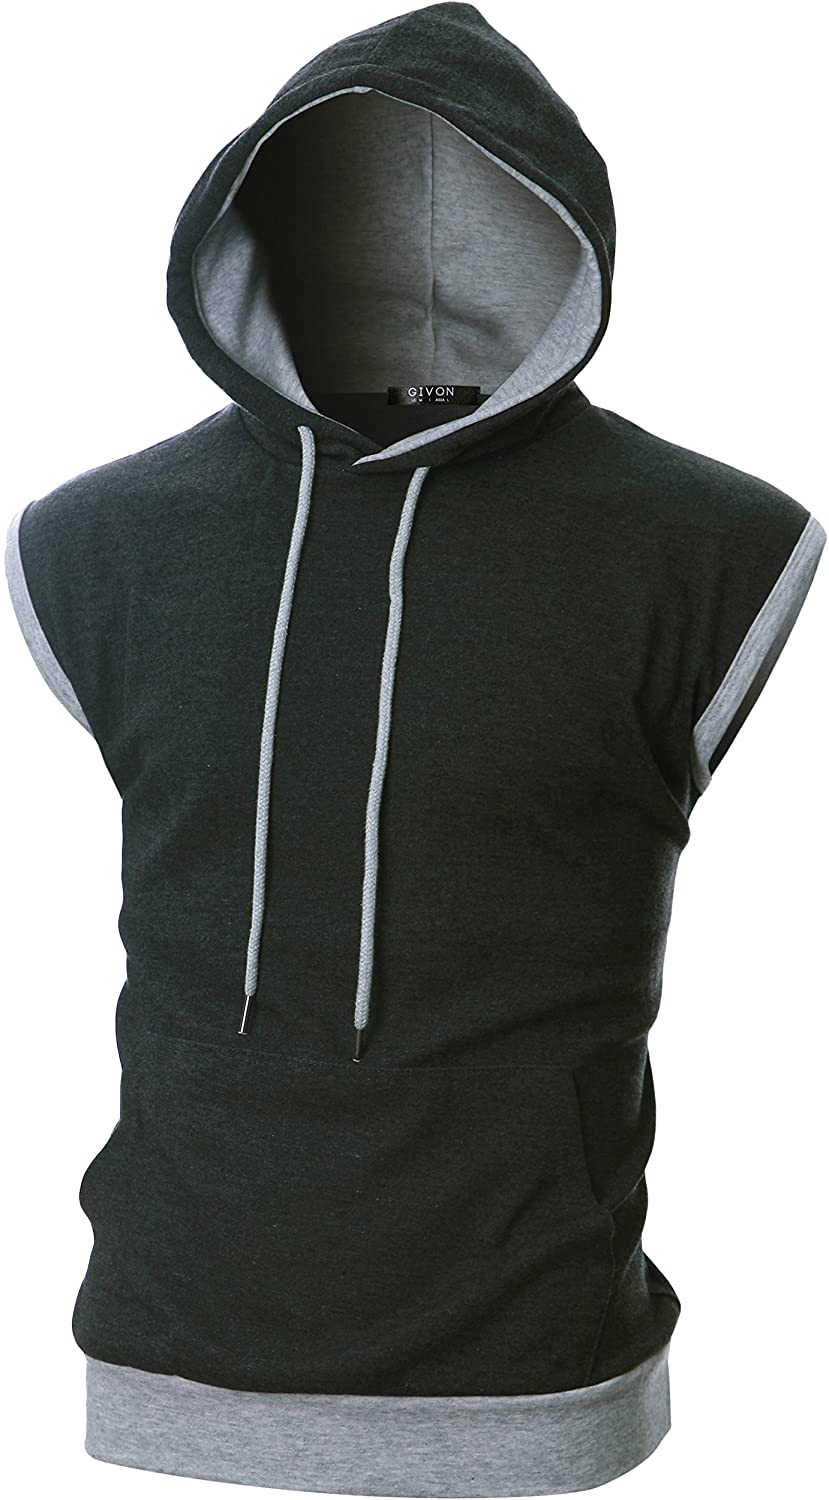 GIVON Mens Slim Fit Sleeveless Color Combination Lightweight Hooded Vest 